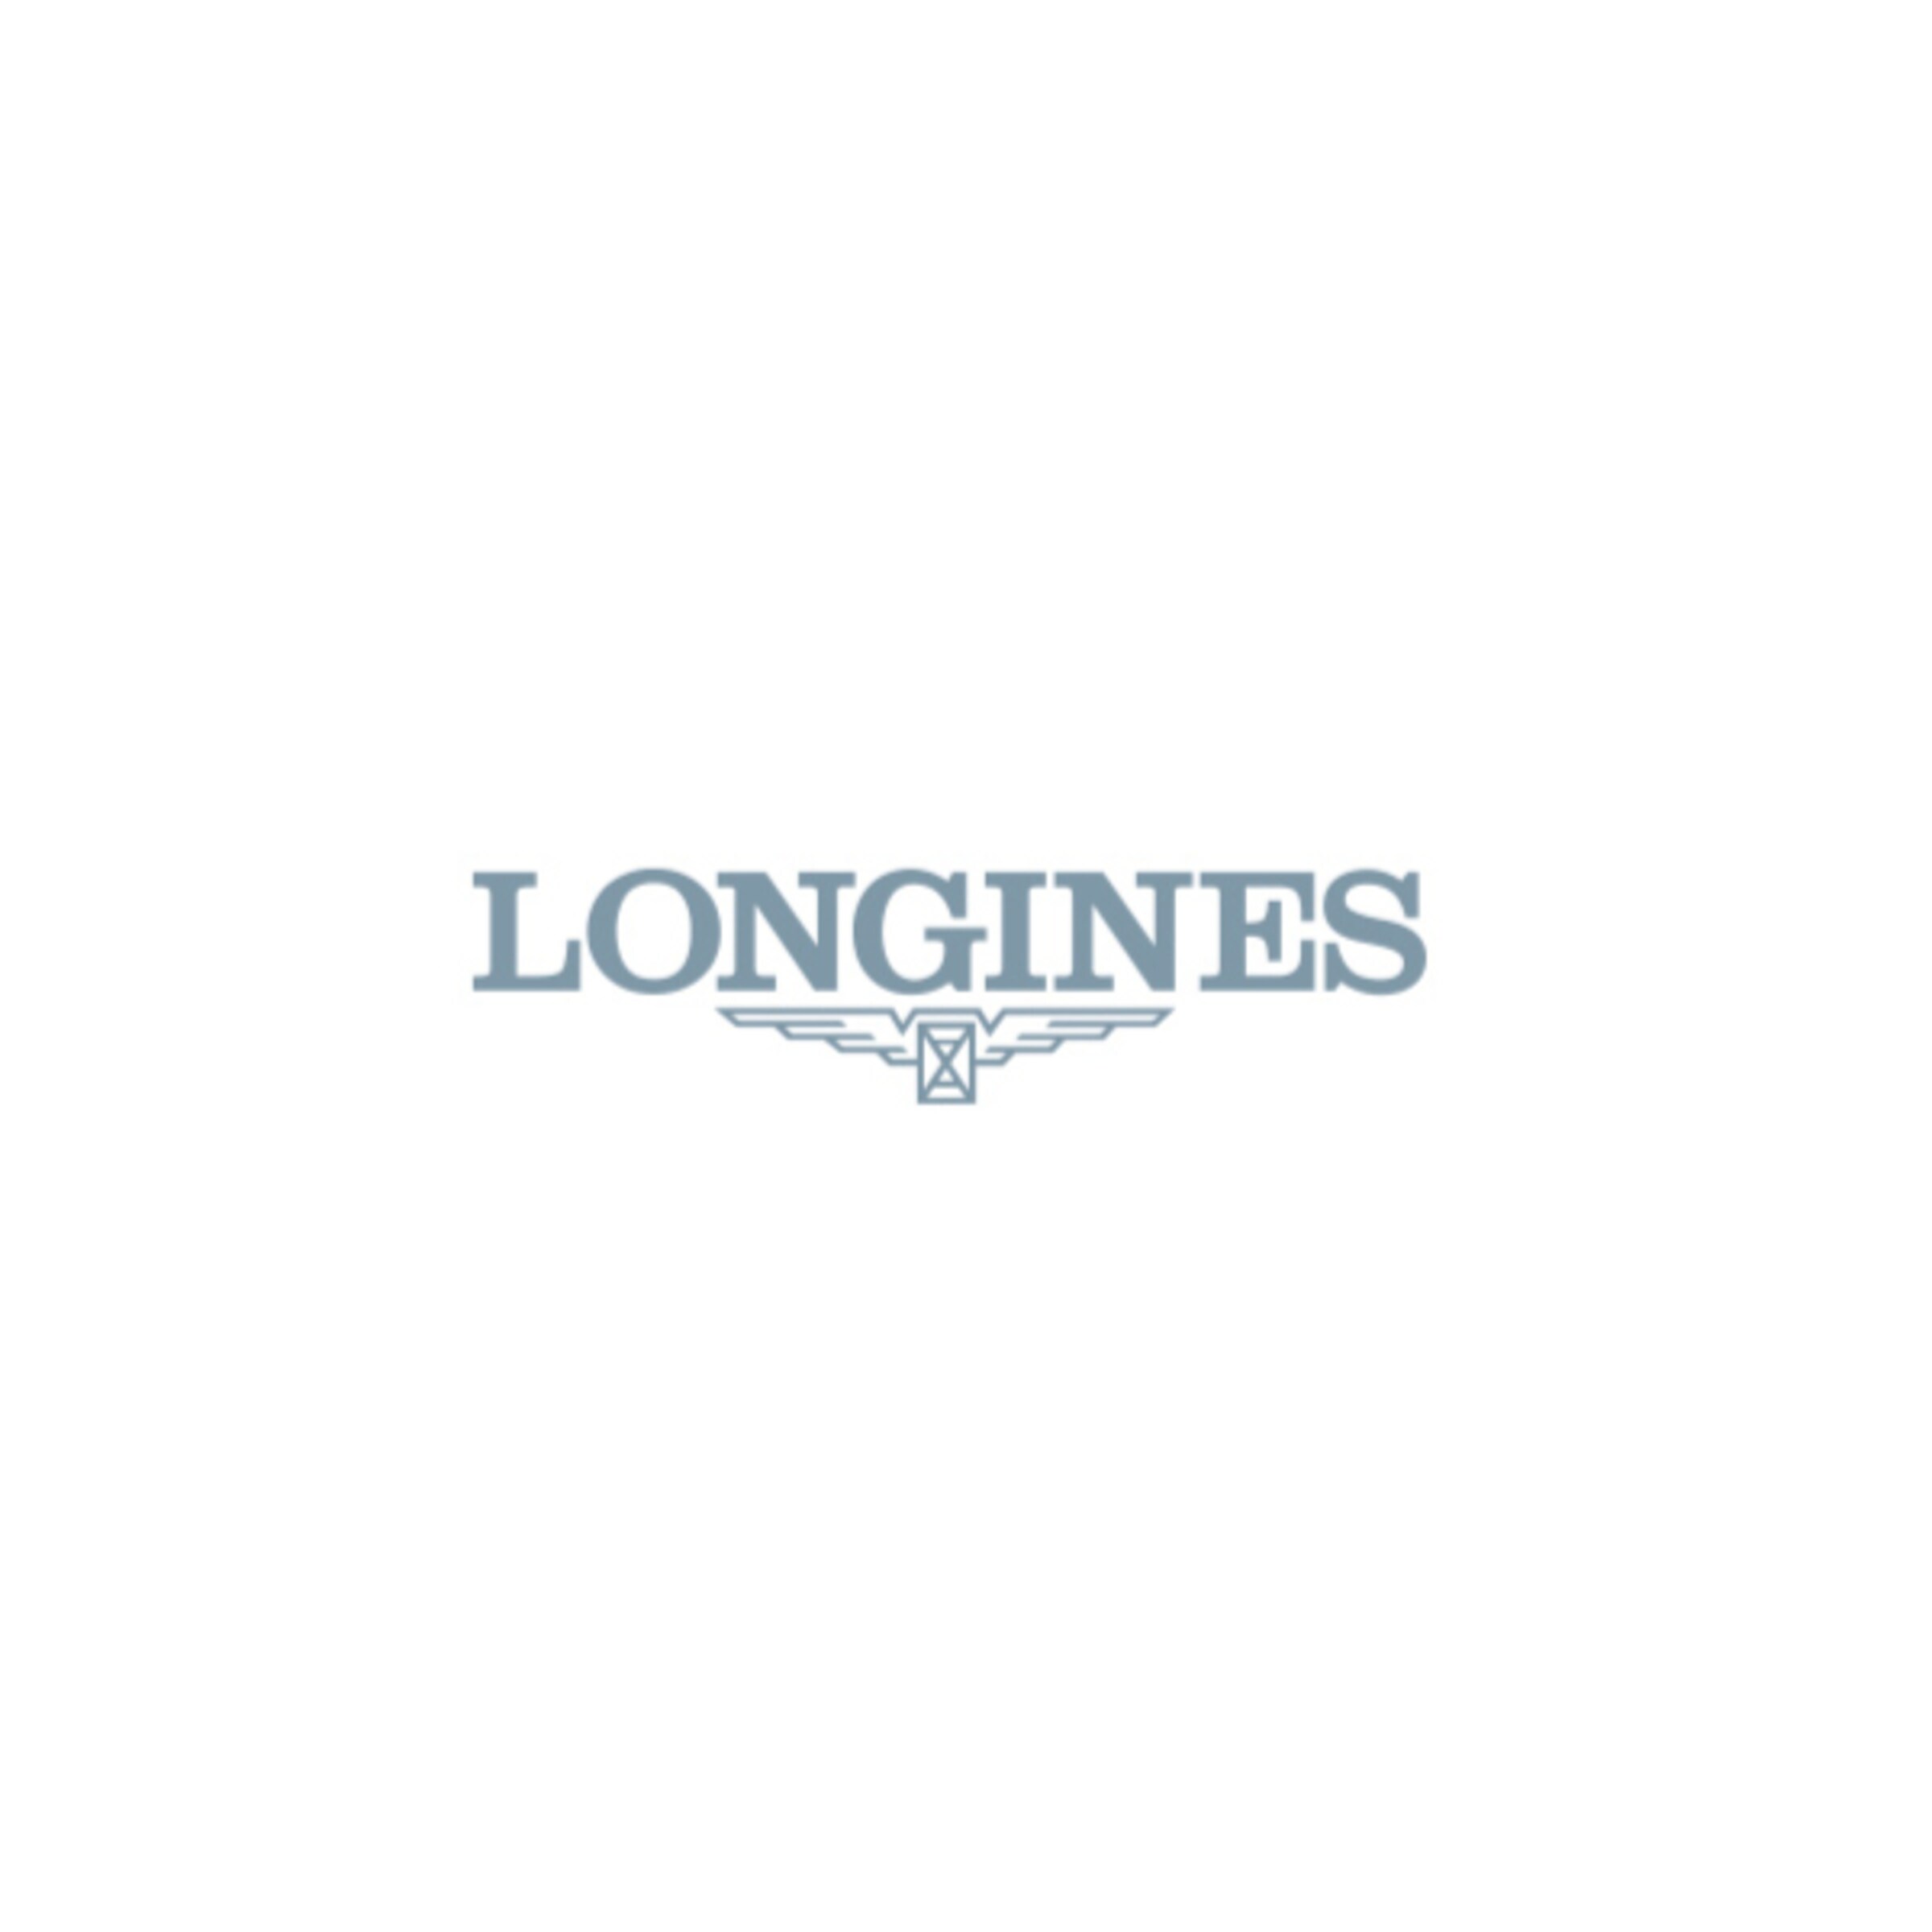 Longines THE LONGINES LEGEND DIVER WATCH Automatic Stainless steel Watch - L3.774.4.70.2